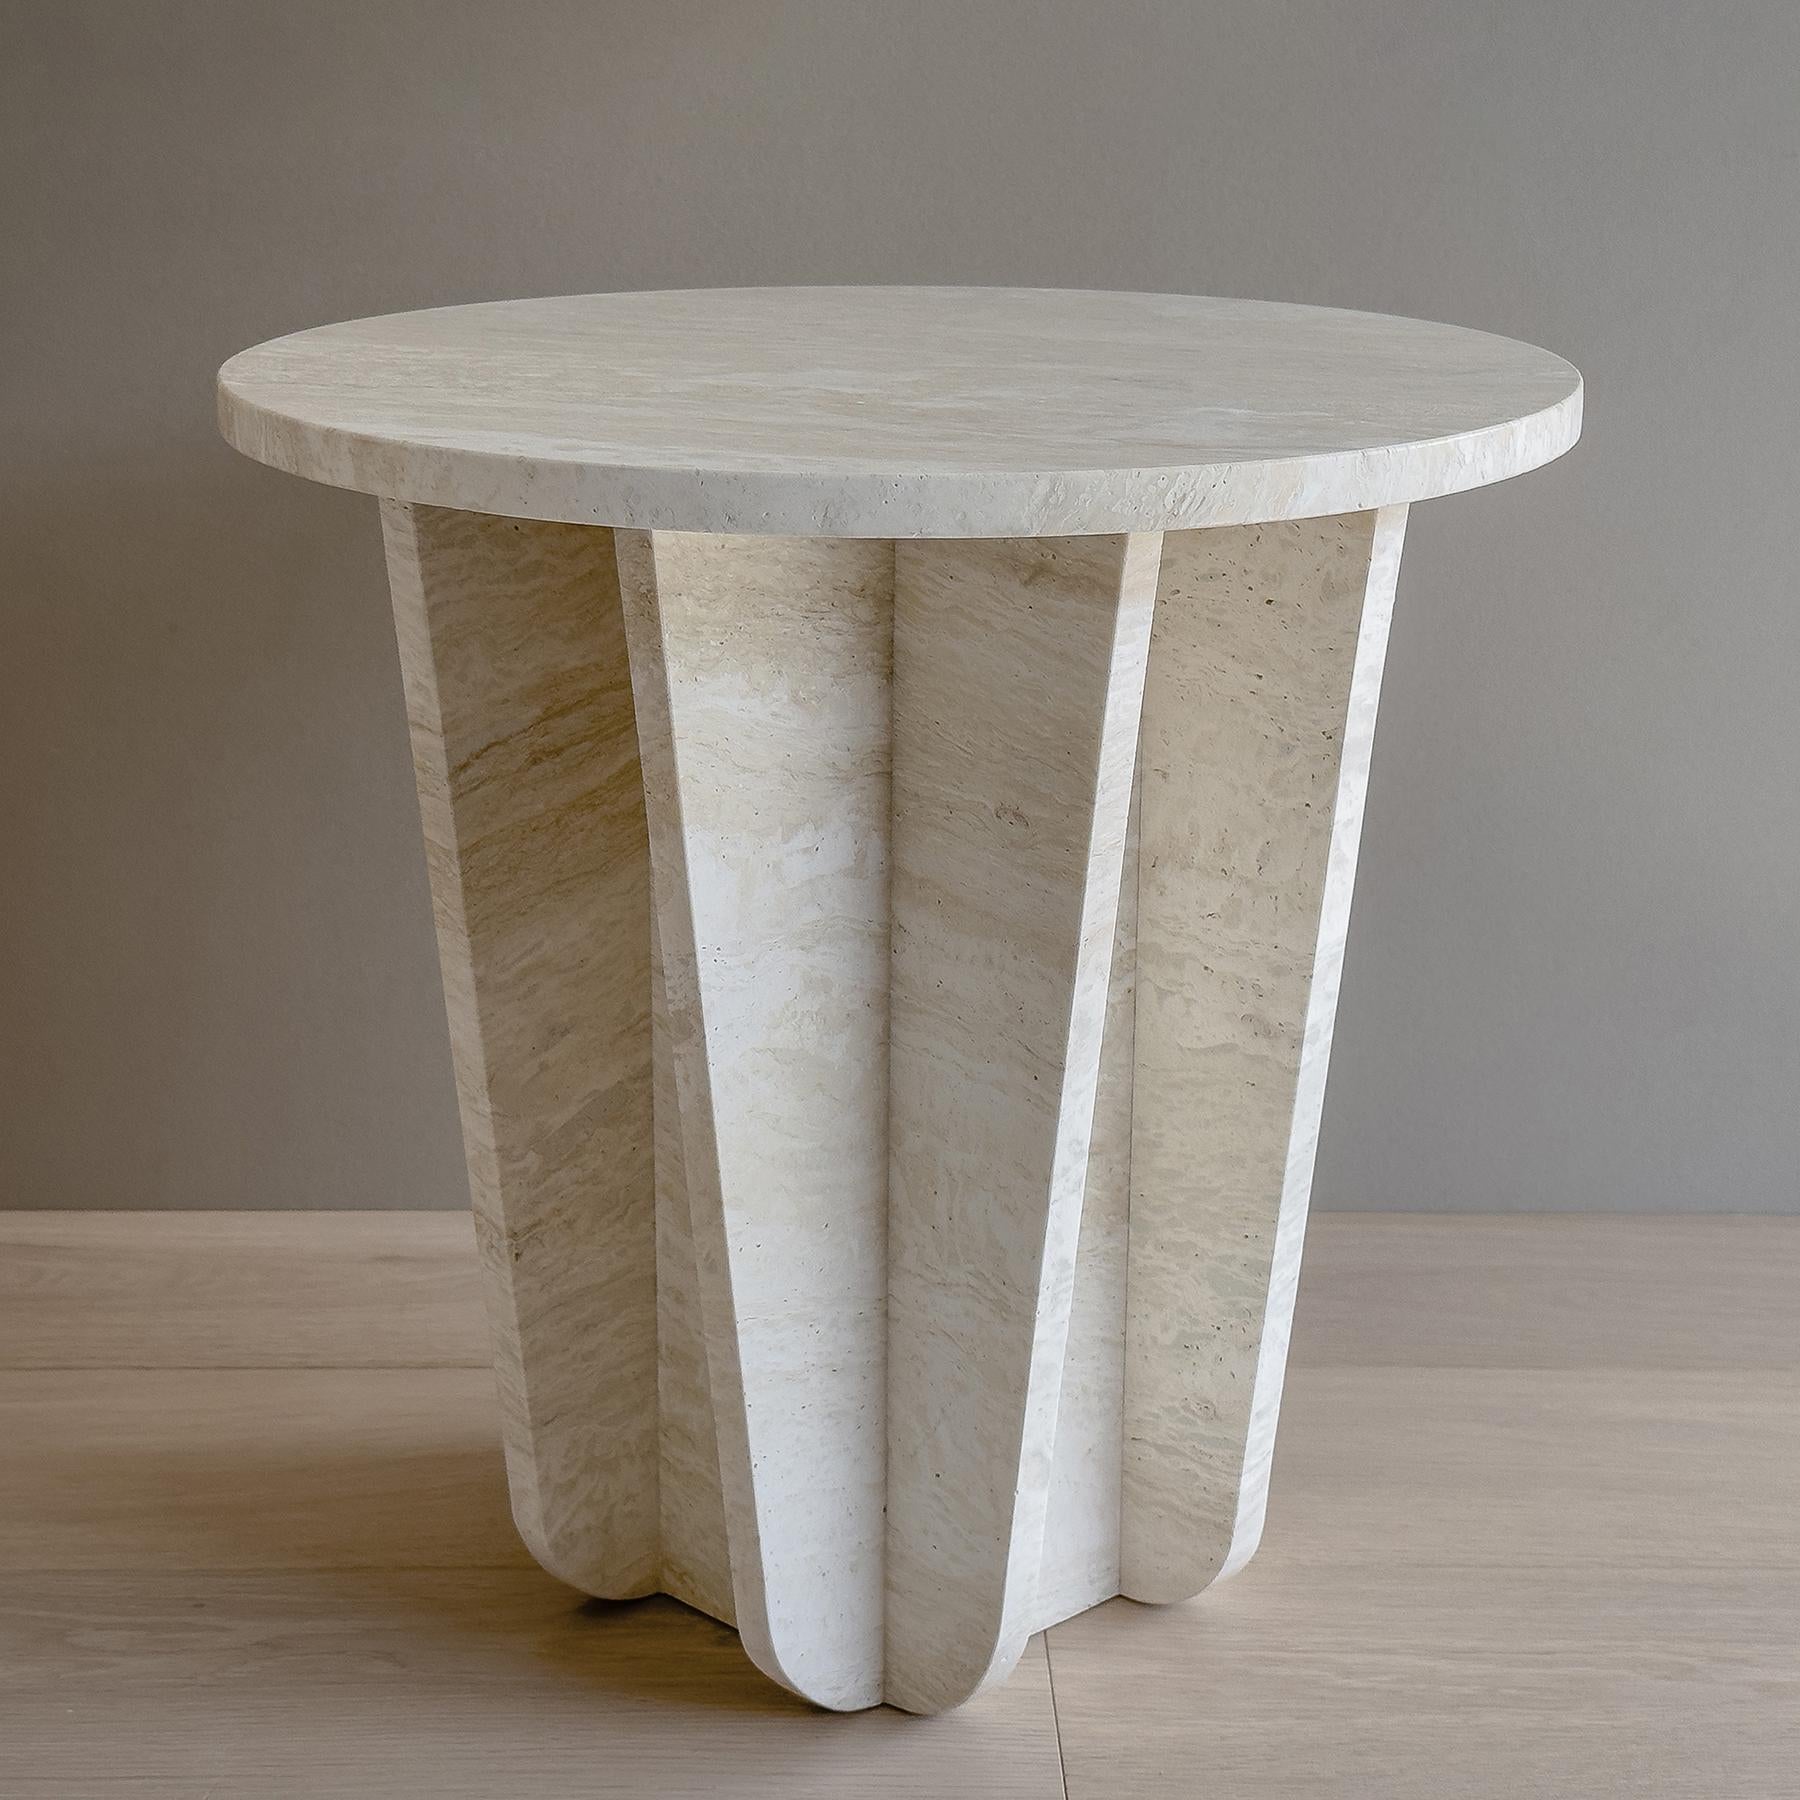 The BLOOM Table is crafted from white Italian travertine and features a tapered and curved structure, giving it an elegant and timeless look. Its minimalist design is perfect for any living space, while its sturdy construction makes it a reliable